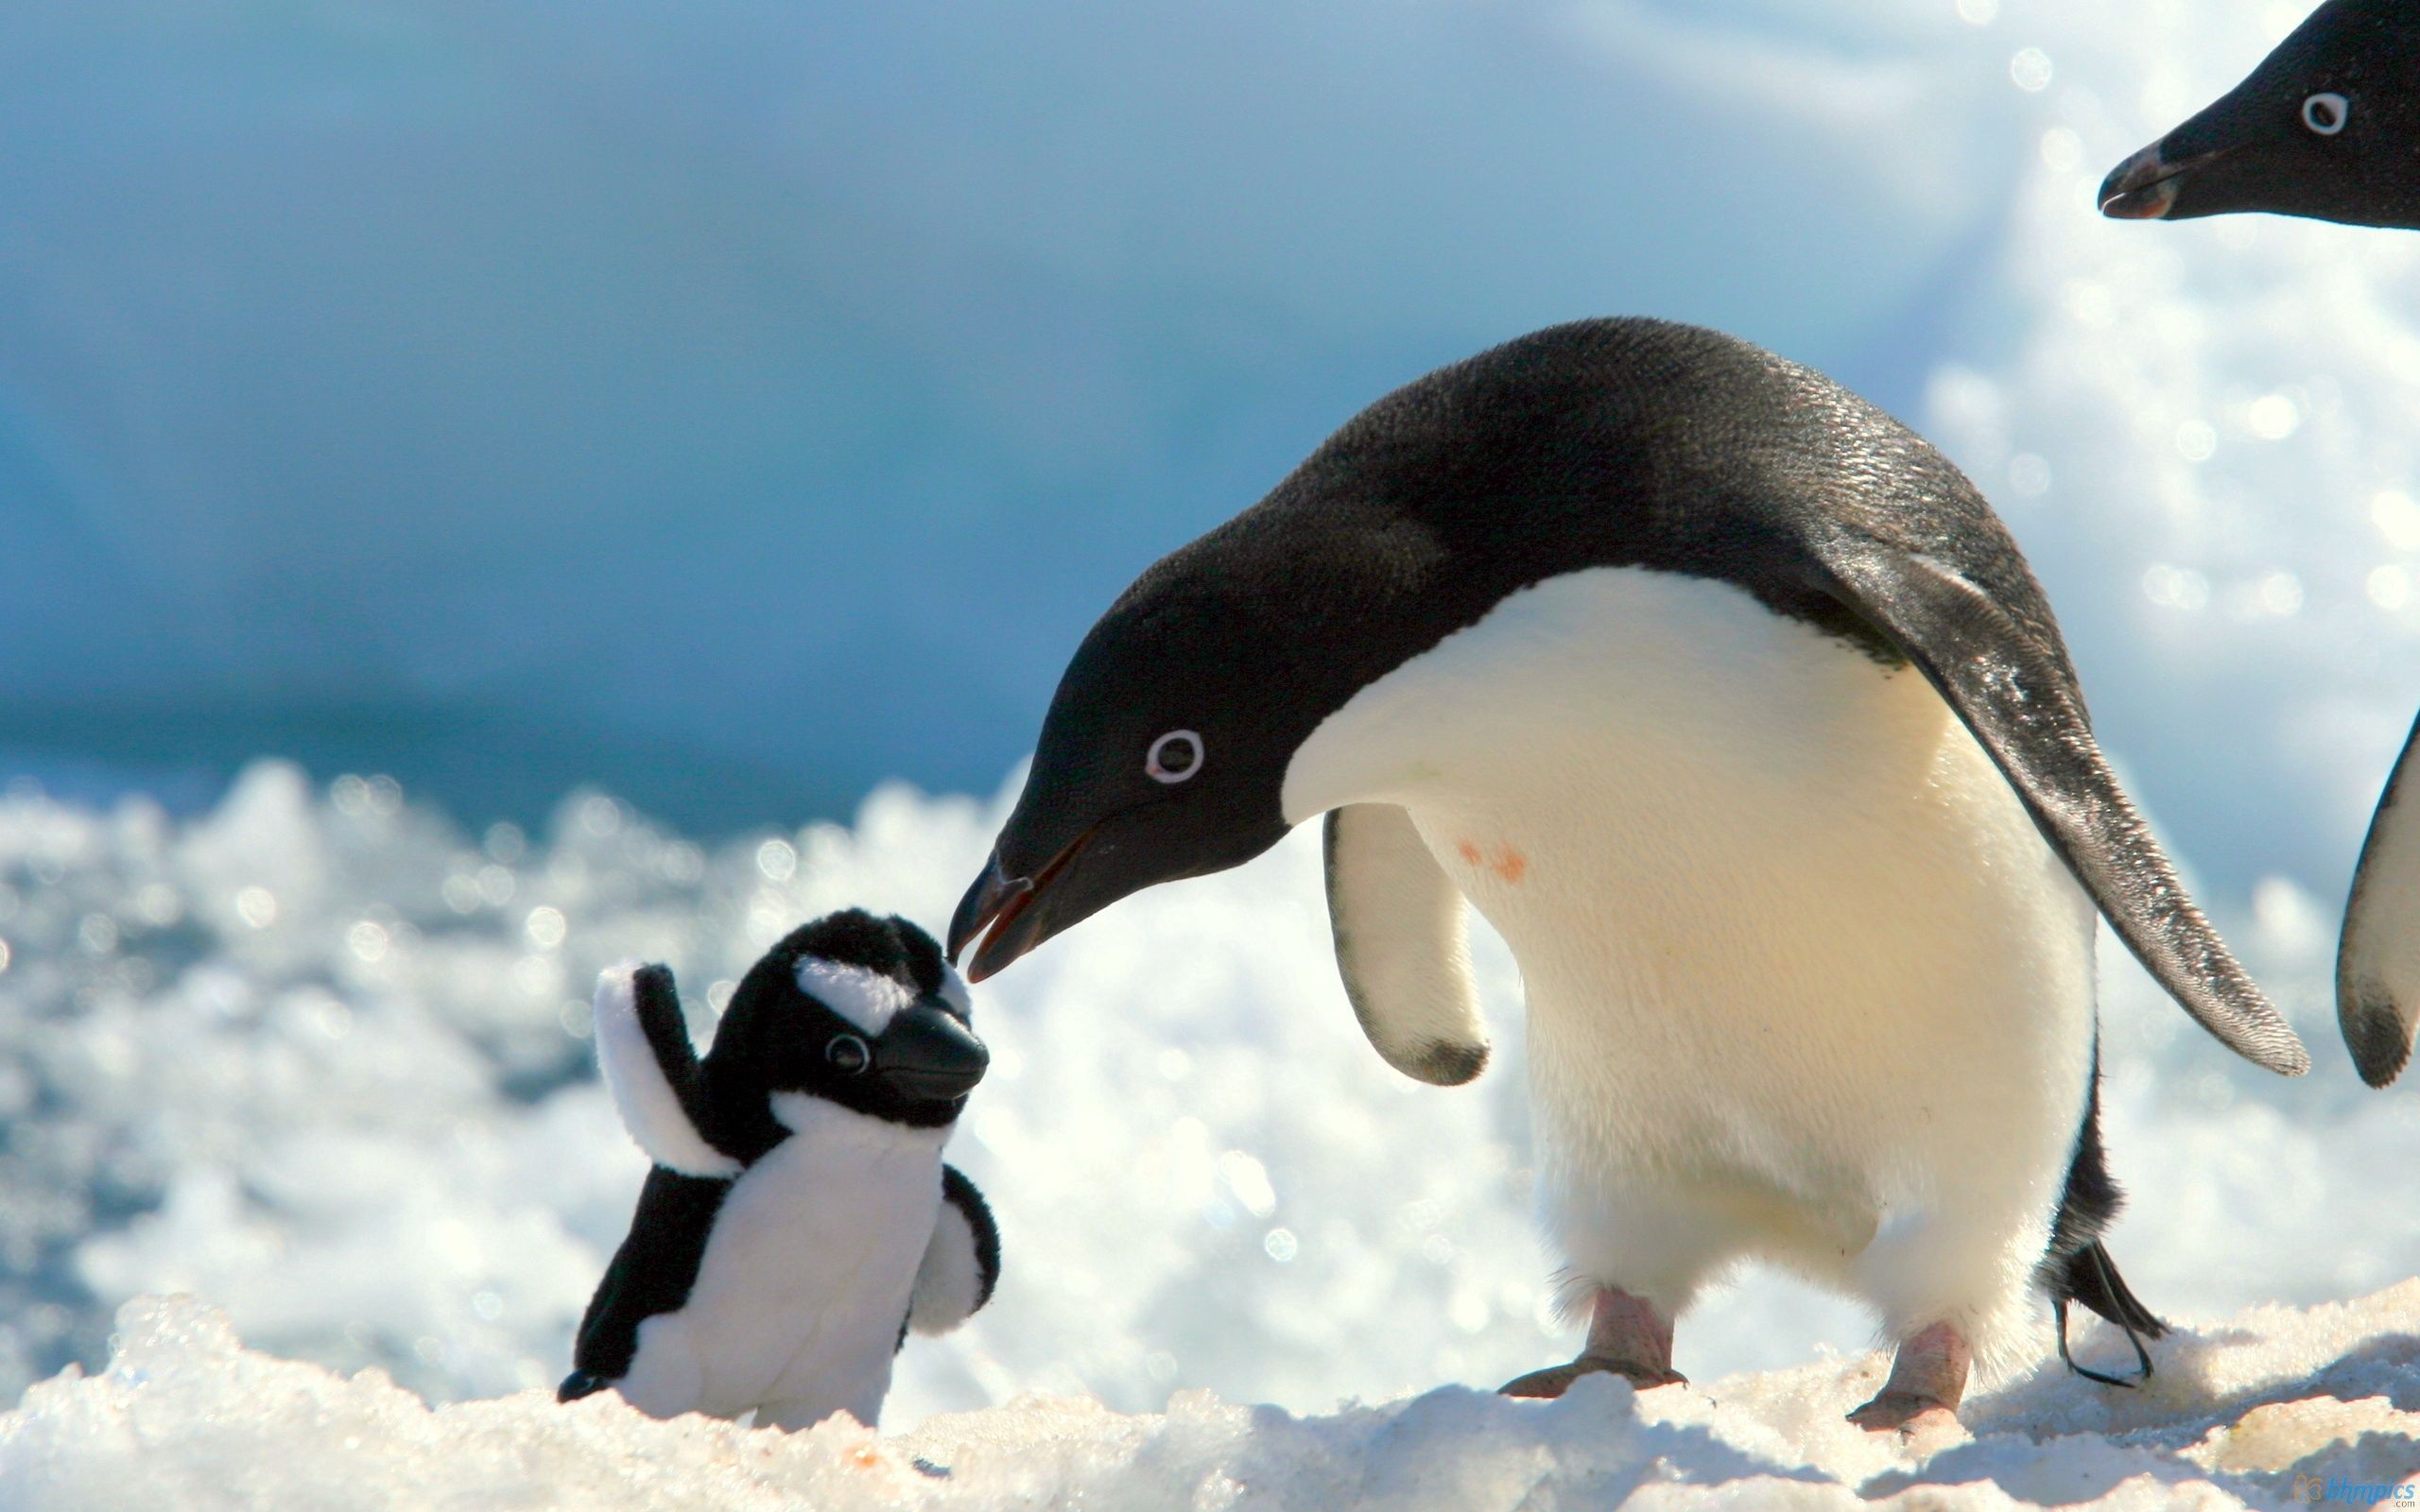 care, animals, pinguins, snow, young, joey Full HD